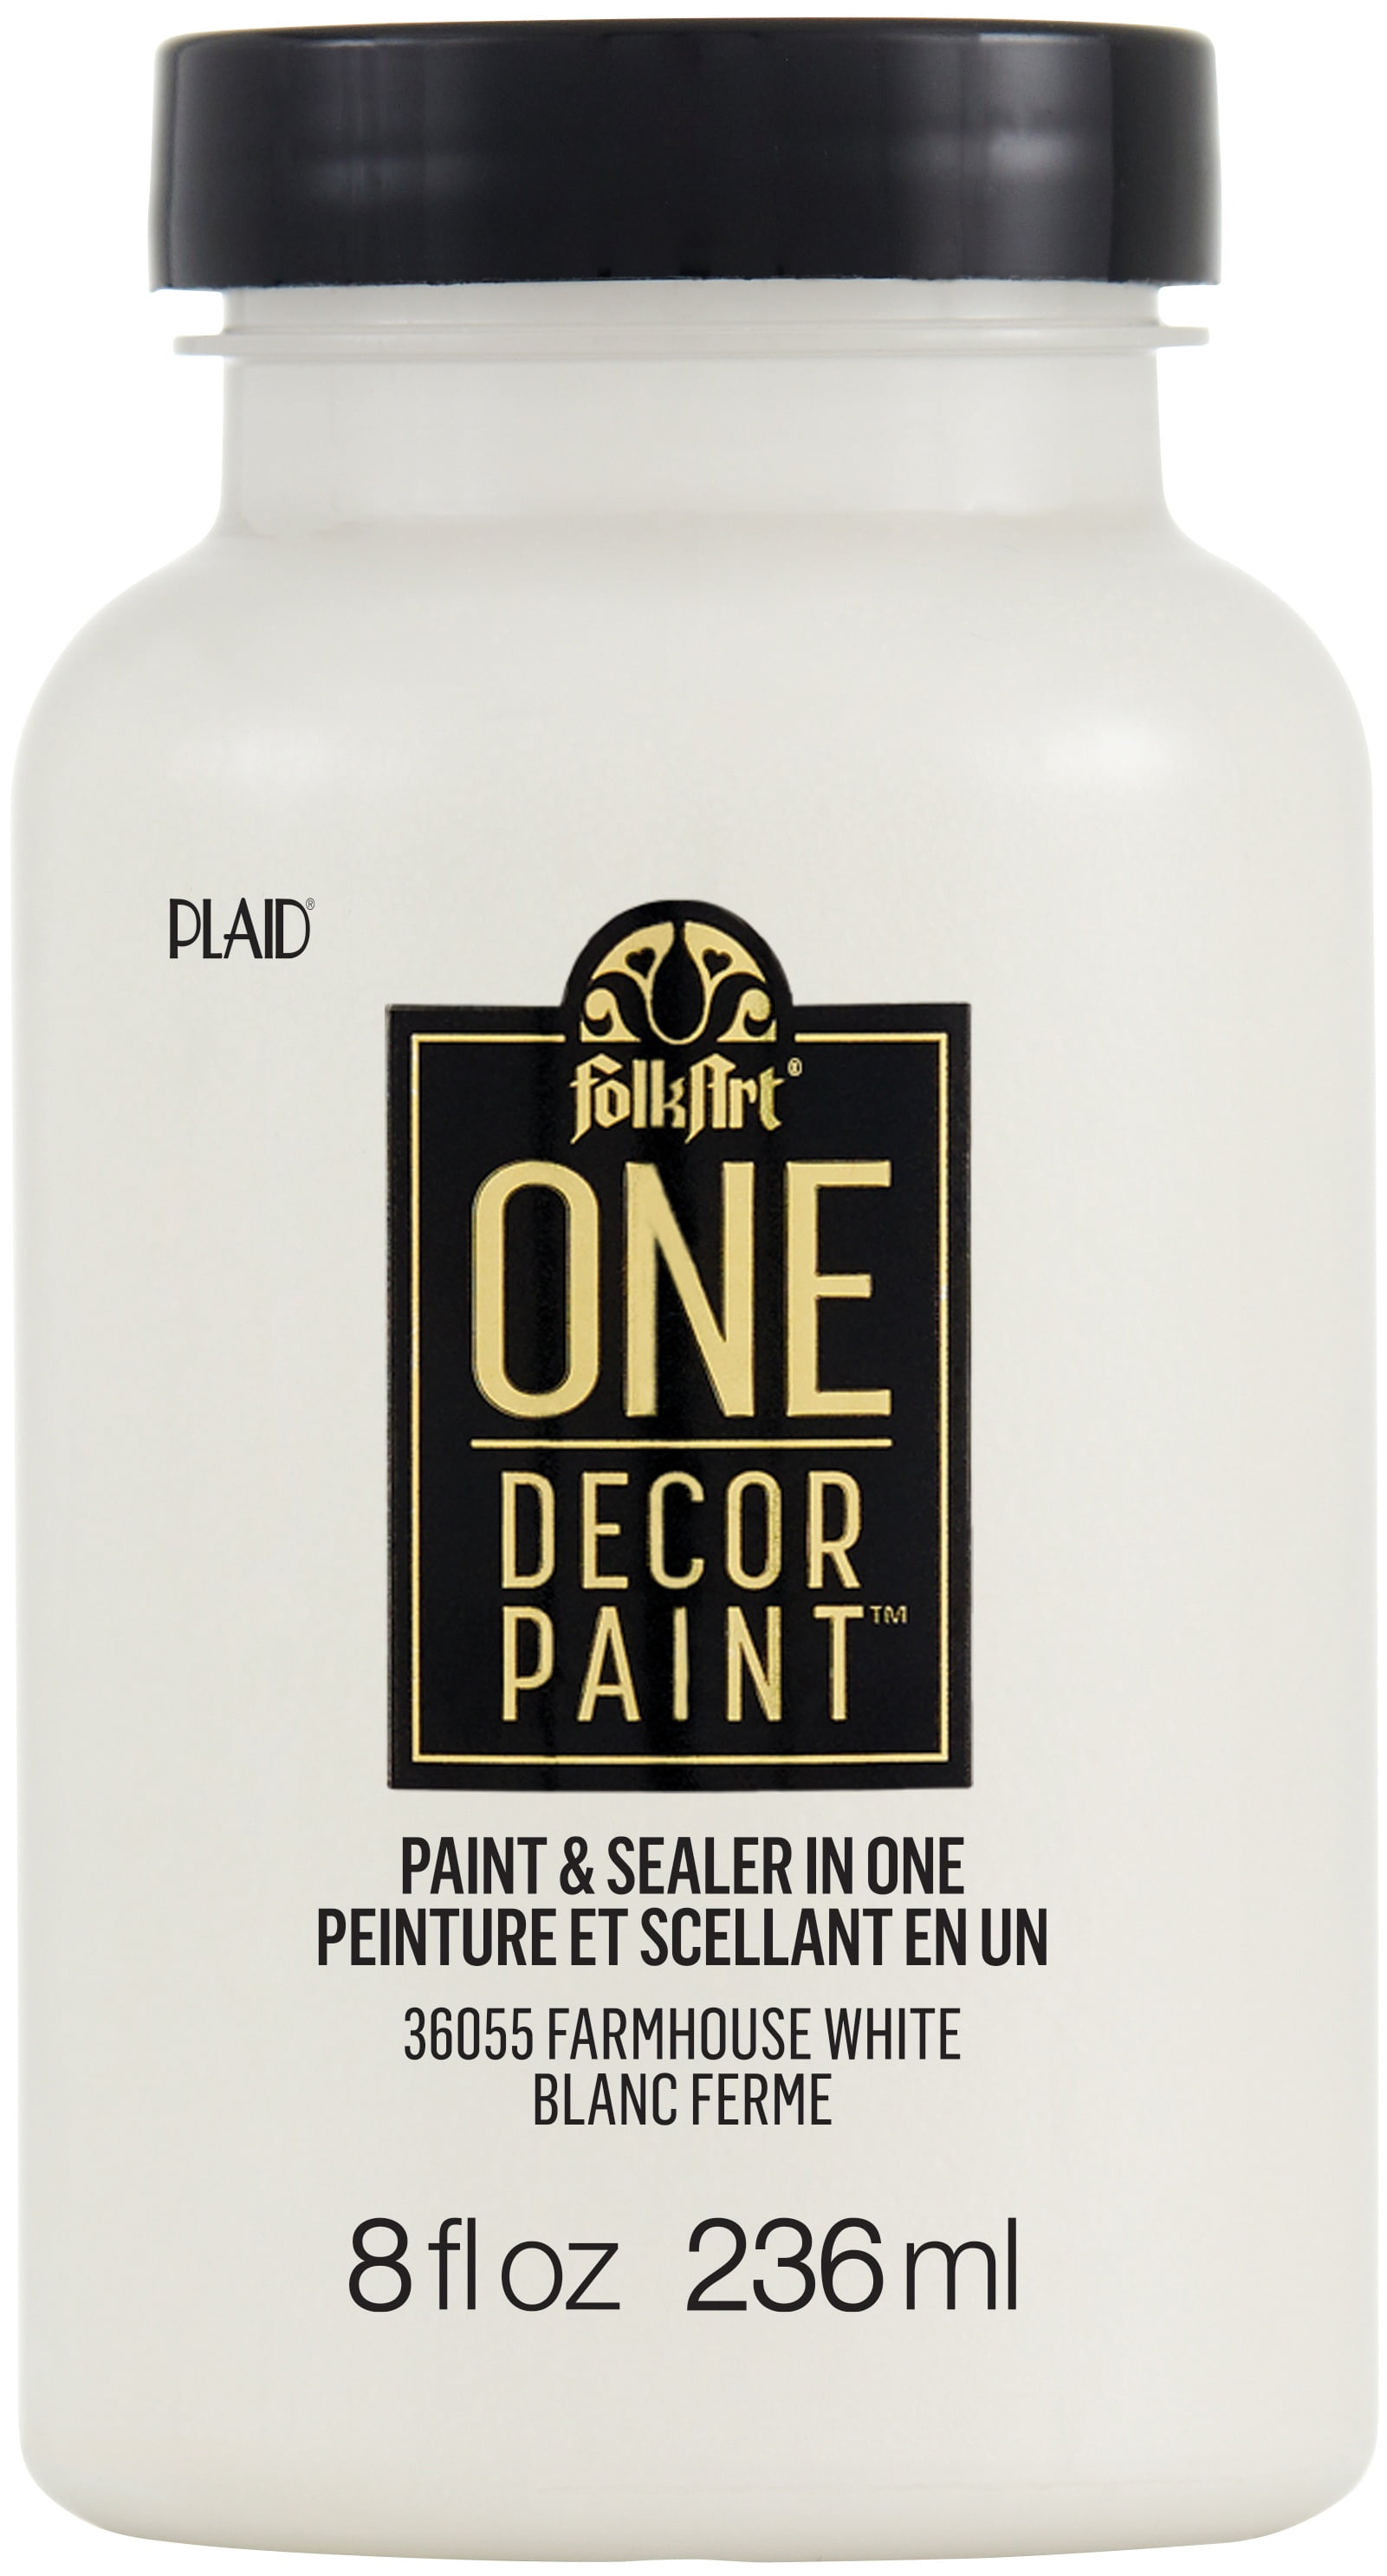 ALL-IN-ONE Paint, Cashmere (True White), 32 Fl Oz Quart. Durable cabinet  and furniture paint. Built in primer and top coat, no sanding needed.